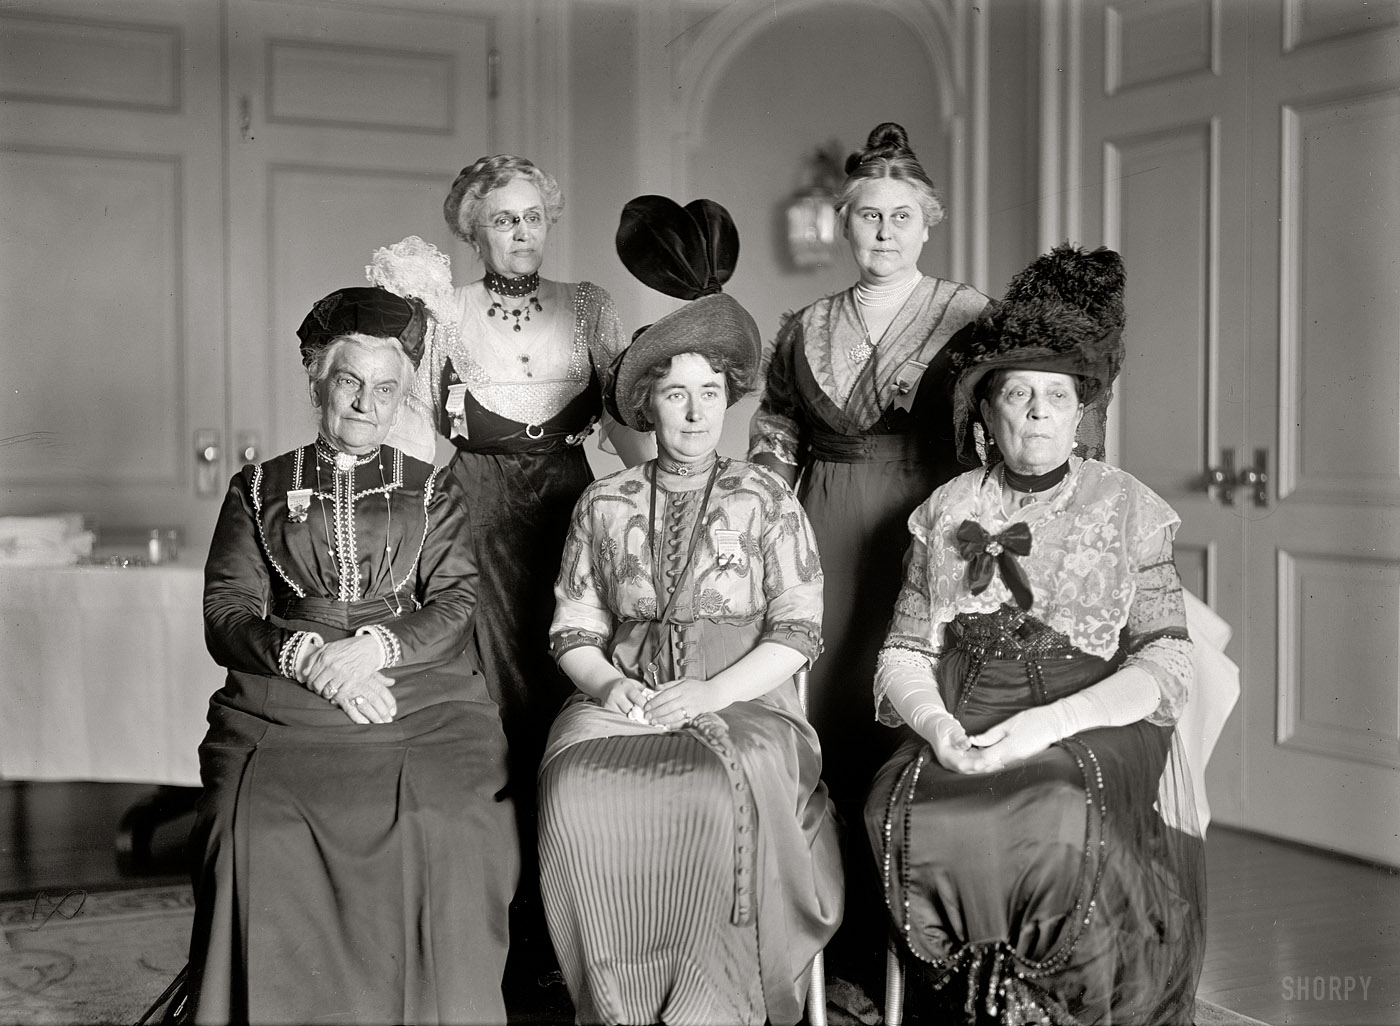 1913. "International Anti-Vivisection Congress. Standing: Mrs. Clinton Pinckney Farrell, Mrs. Florence Pell Waring. Seated: Mrs. Caroline E. White, Miss Louise Lind-af-Hageby, Mrs. Robert G. Ingersoll. The object of the congress is a consistent opposition to all forms of cruelty to animals." View full size.